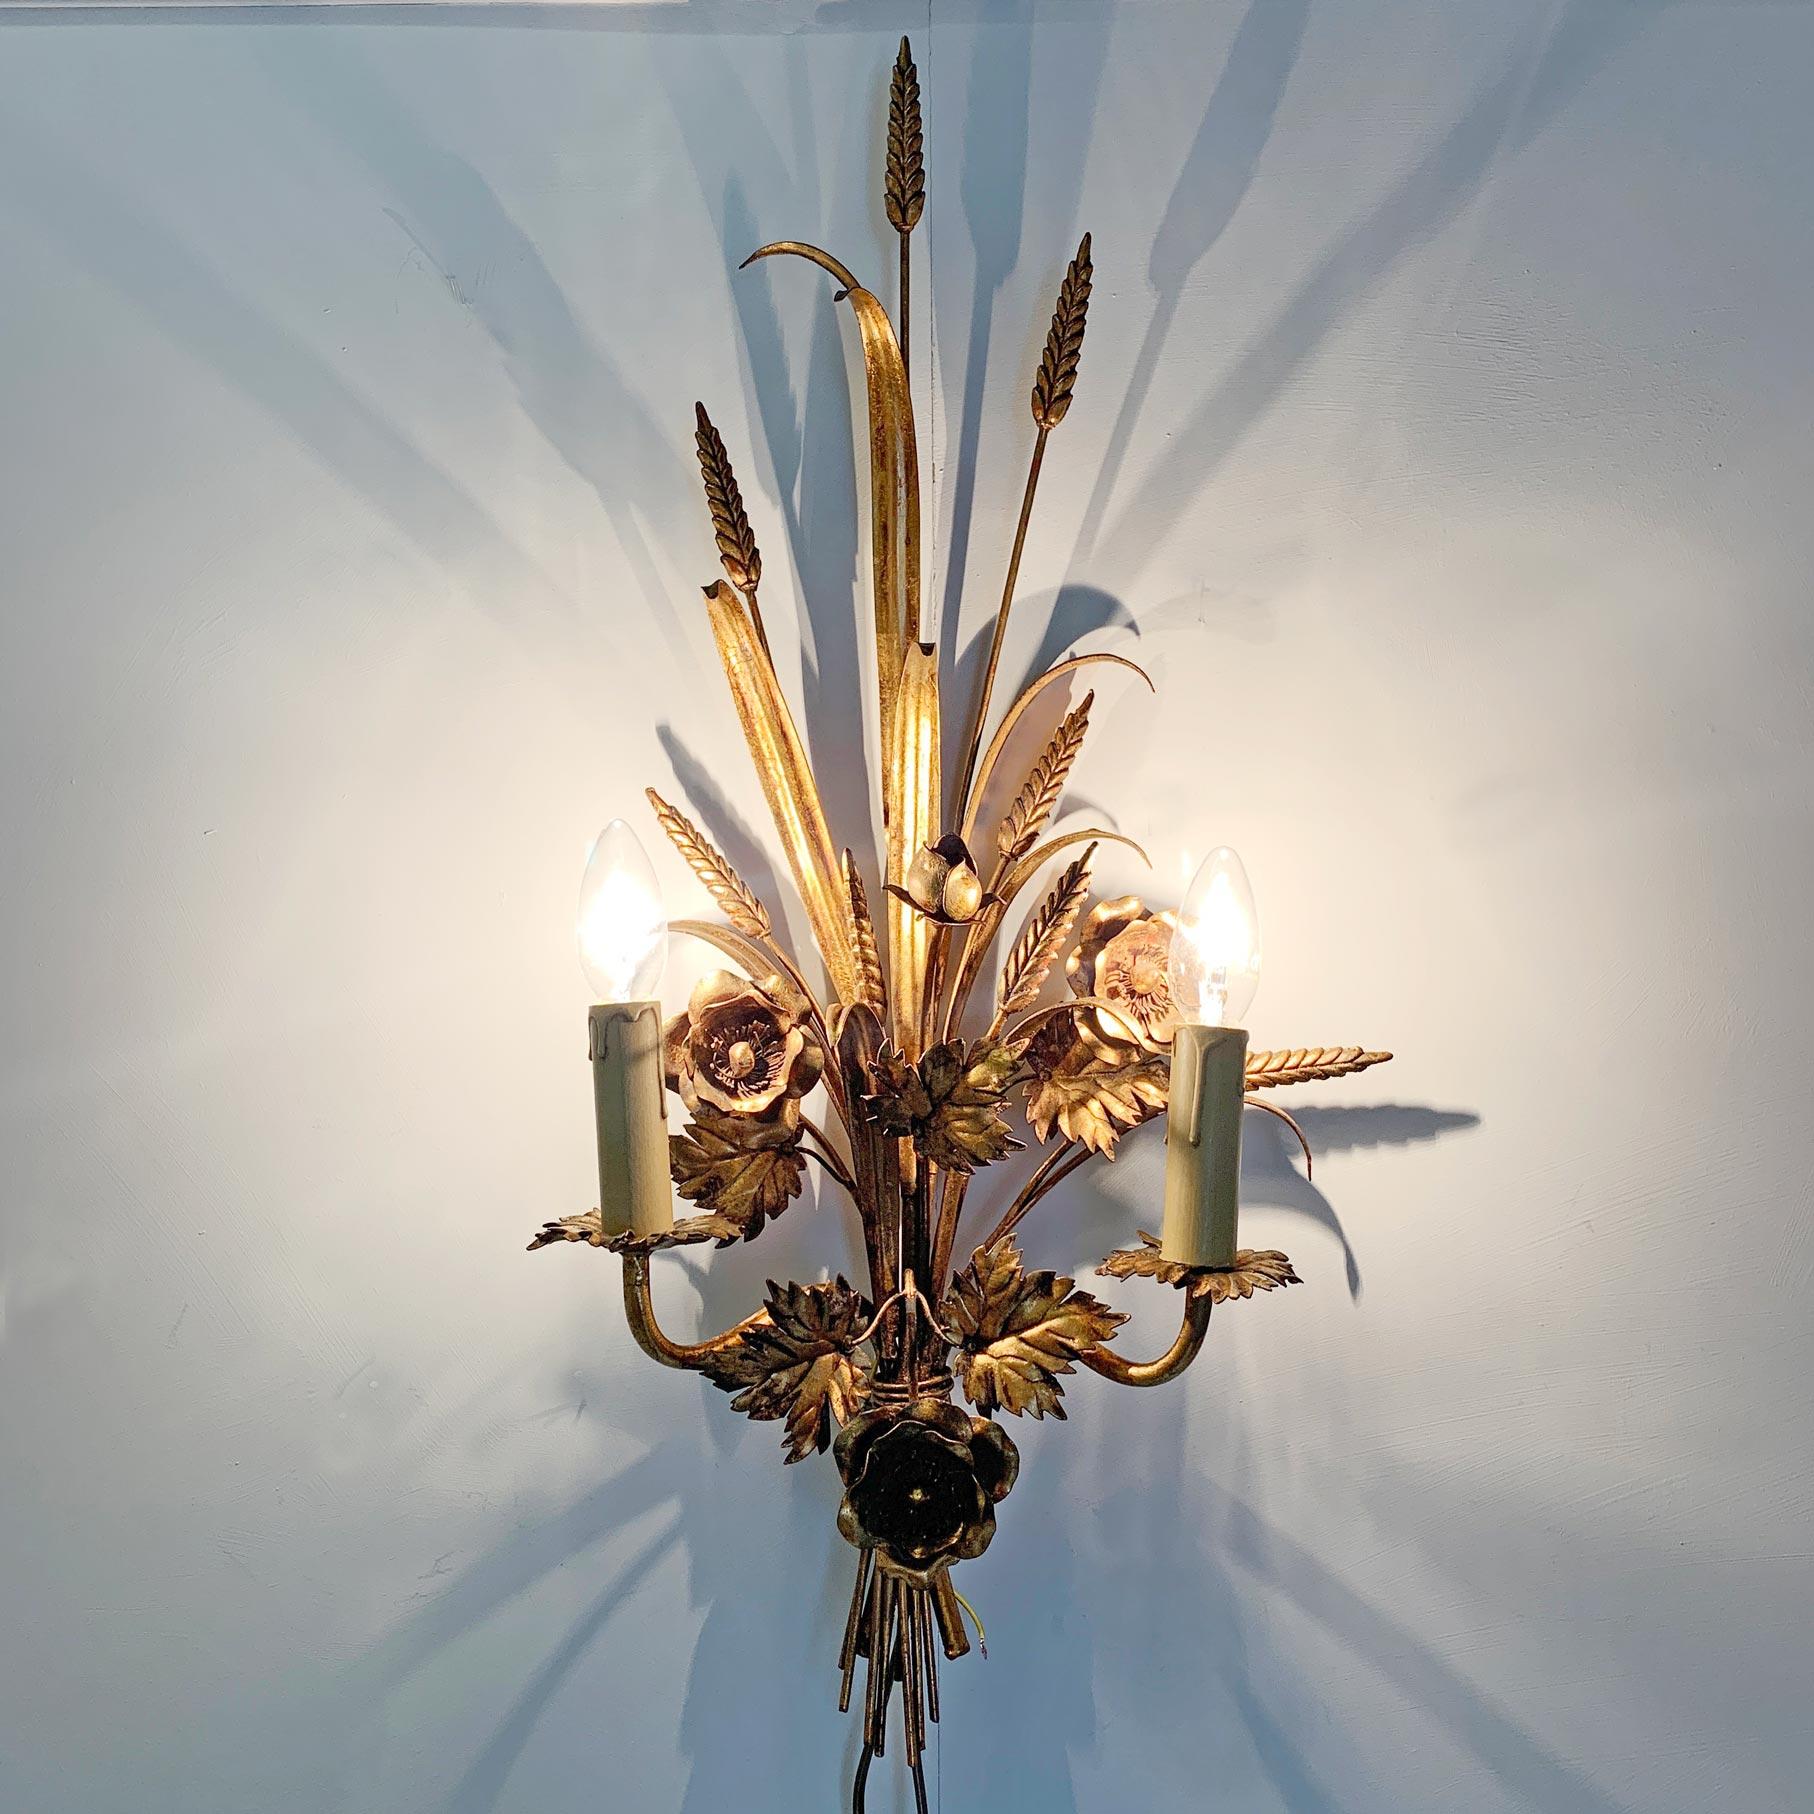 S. Salvadori wheatsheaf scone light,
circa 1970s, Italy
Beautiful single large wall sconce with wheat sheaf and flower details
The light takes 2 E14 small screw in bulbs
Original gilt finish
Measures: 74cm height, 15cm depth
 
The light is in full